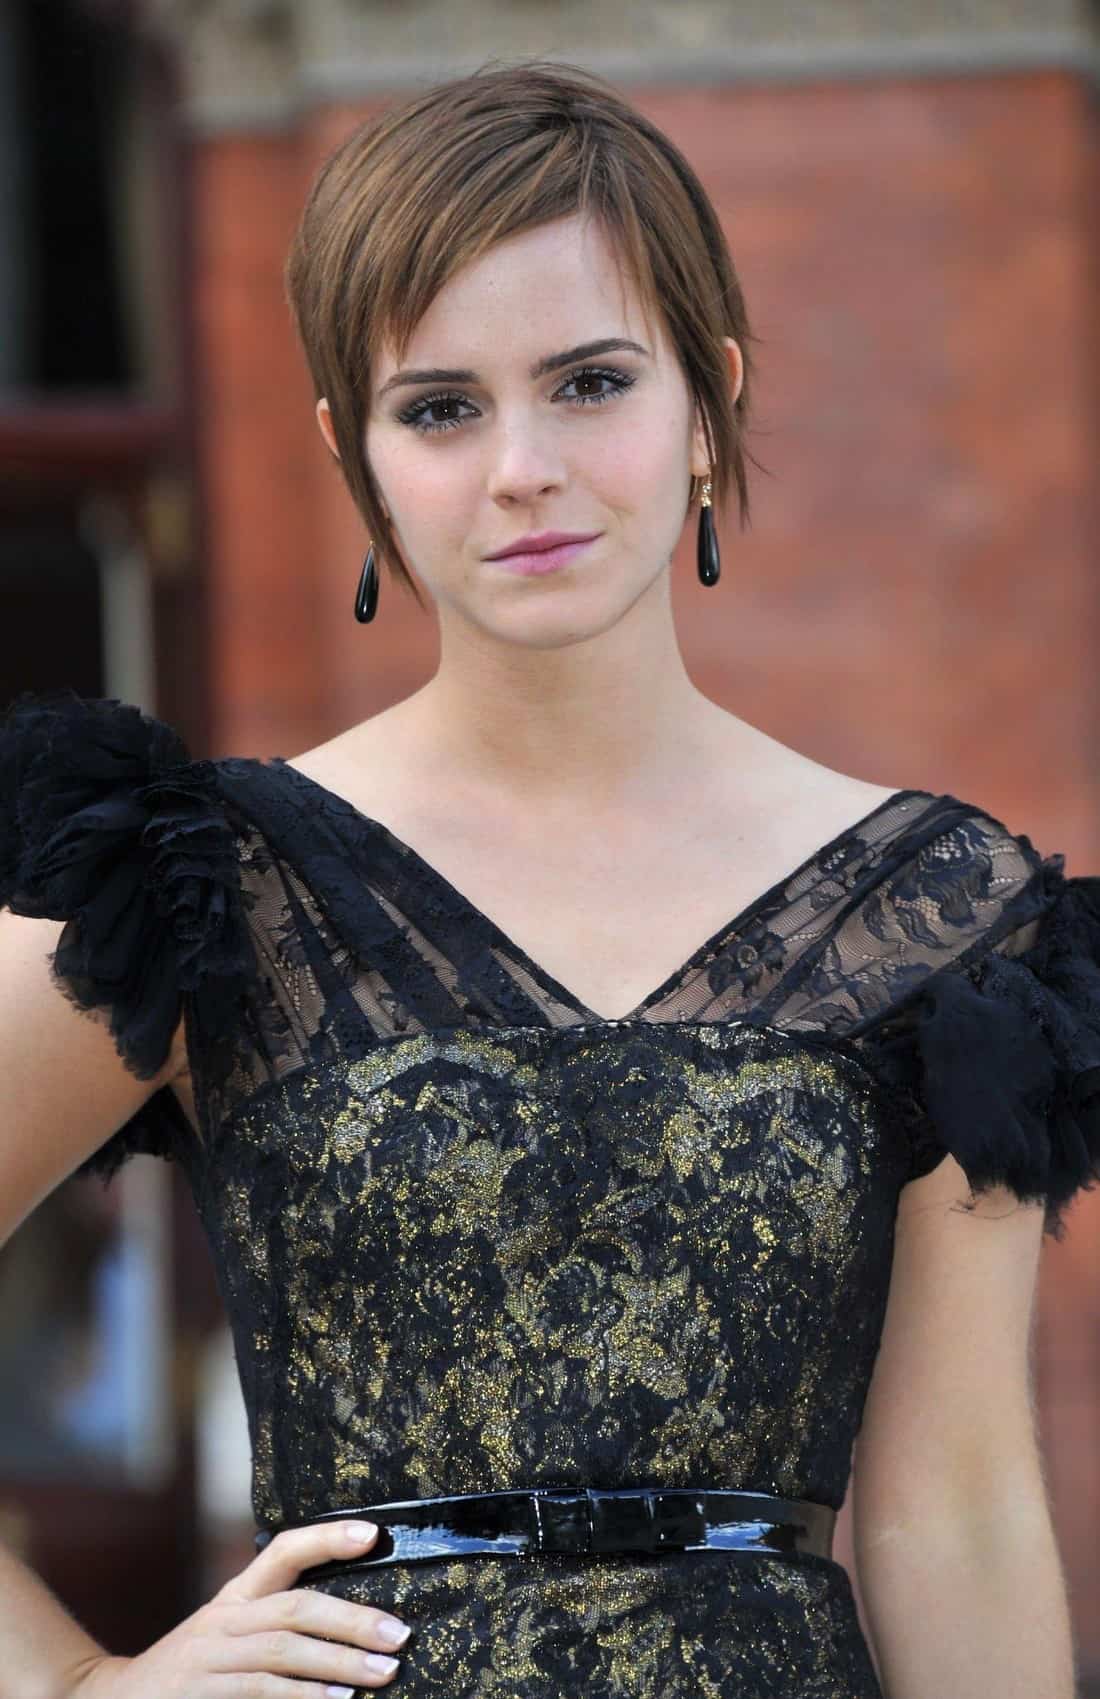 Emma Watson Radiates Beauty in Black and Gold Dress at Photocall